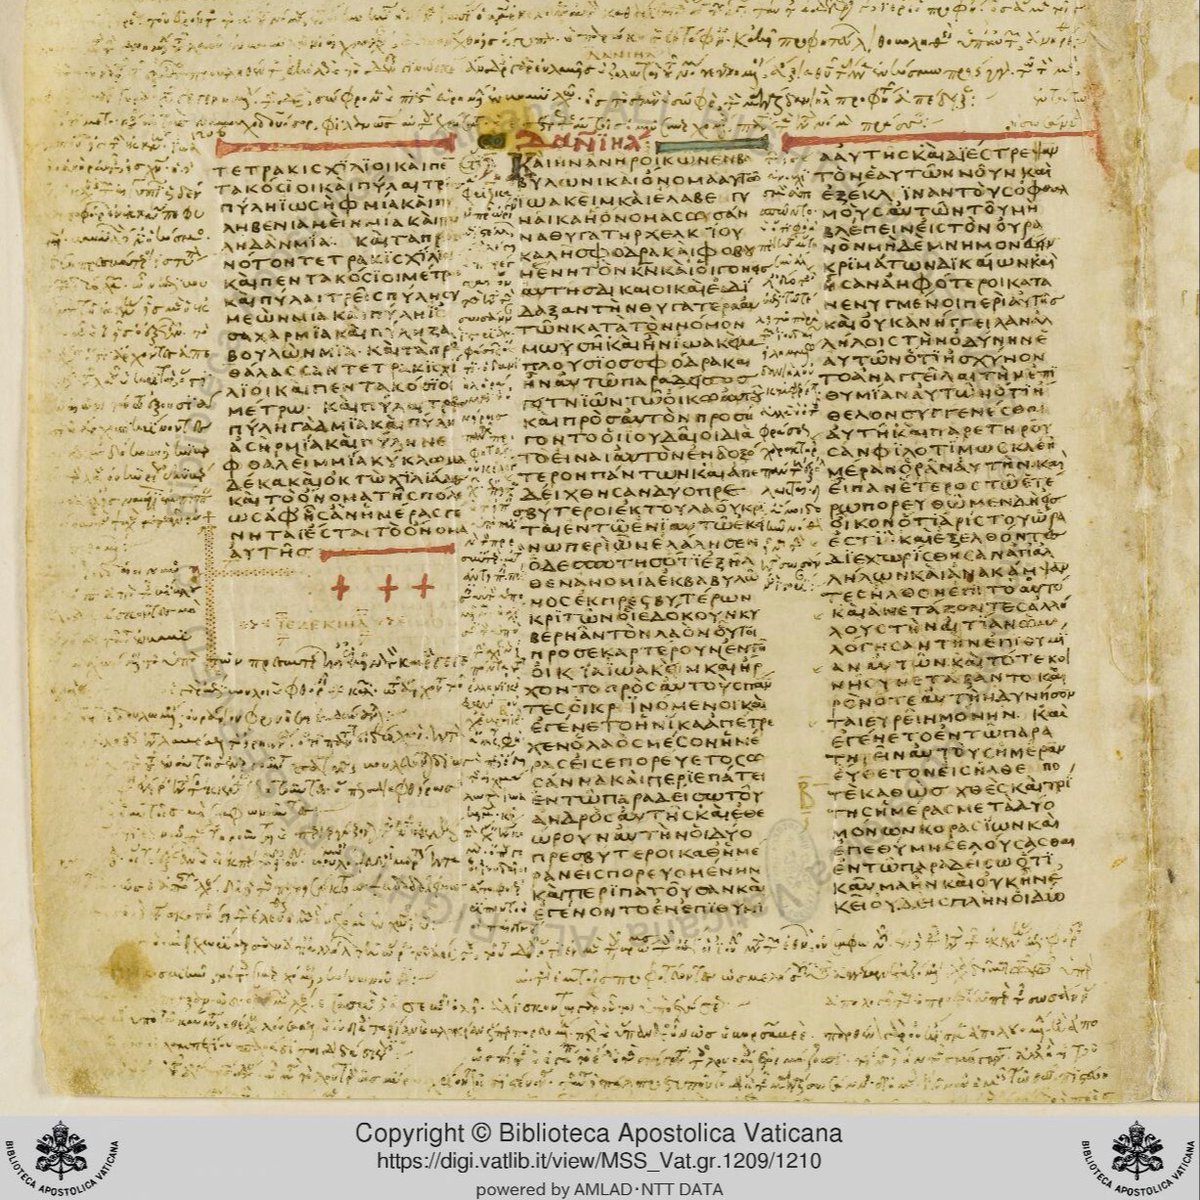 #ManuscriptMonday: CODEX VATICANUS

some things you might NOT know... 🤔

1. Codex Vaticanus contains both the Greek Old Testament and Greek New Testament, with some apocryphal additions:

it has the apocryphal books 1 Esdras, Baruch, Epistle of Jeremiah, Susanna, and...